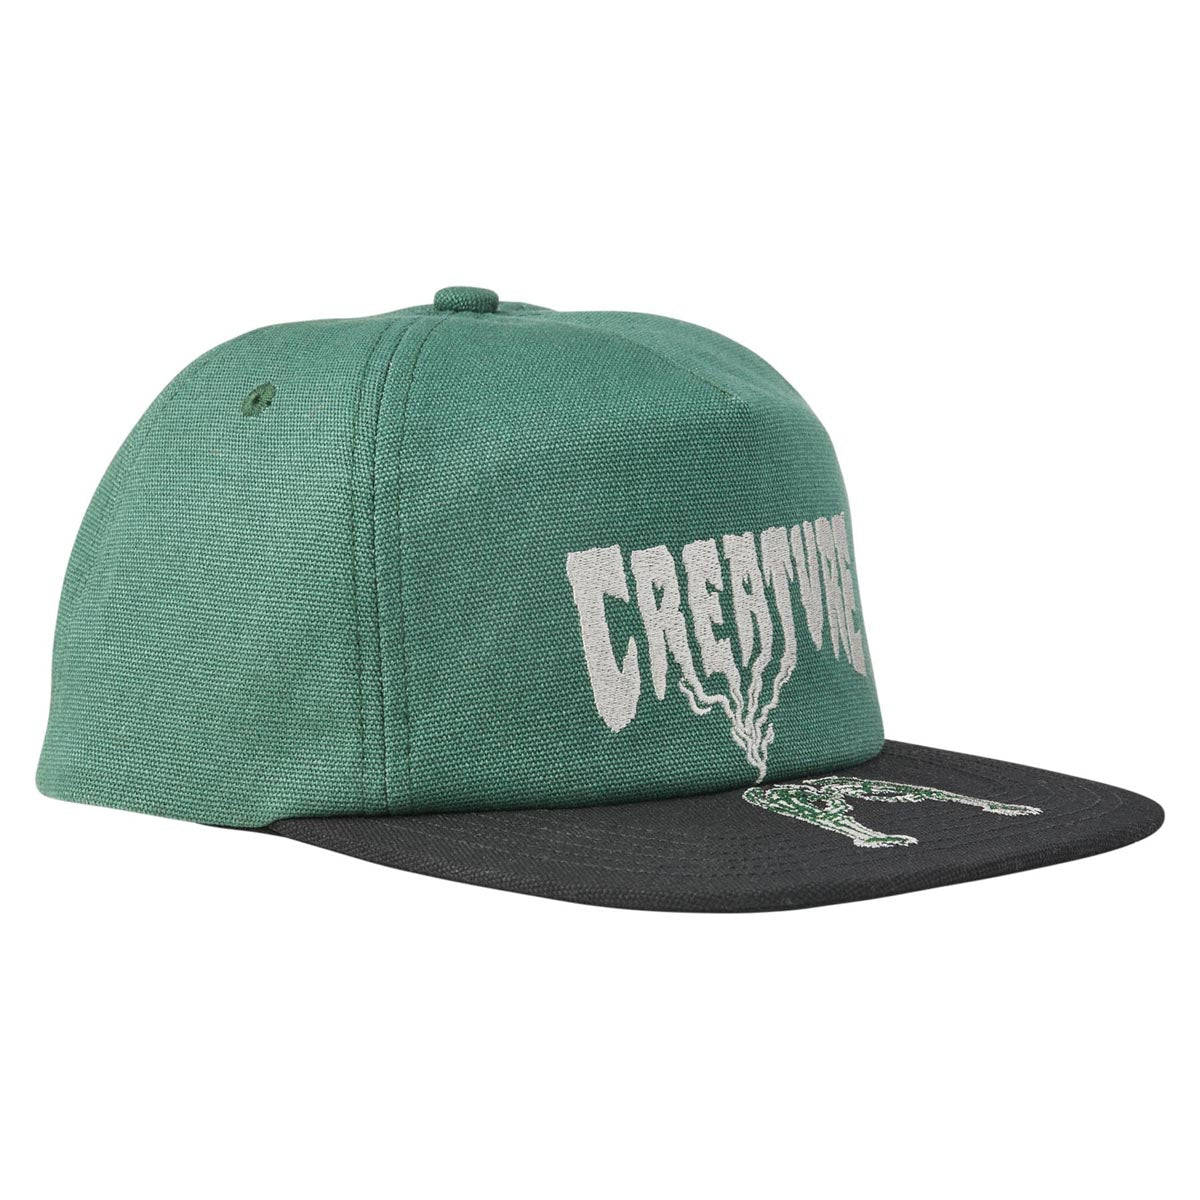 Creature Rolling In The Grave Snapback Hat - Dark Green/Black image 3